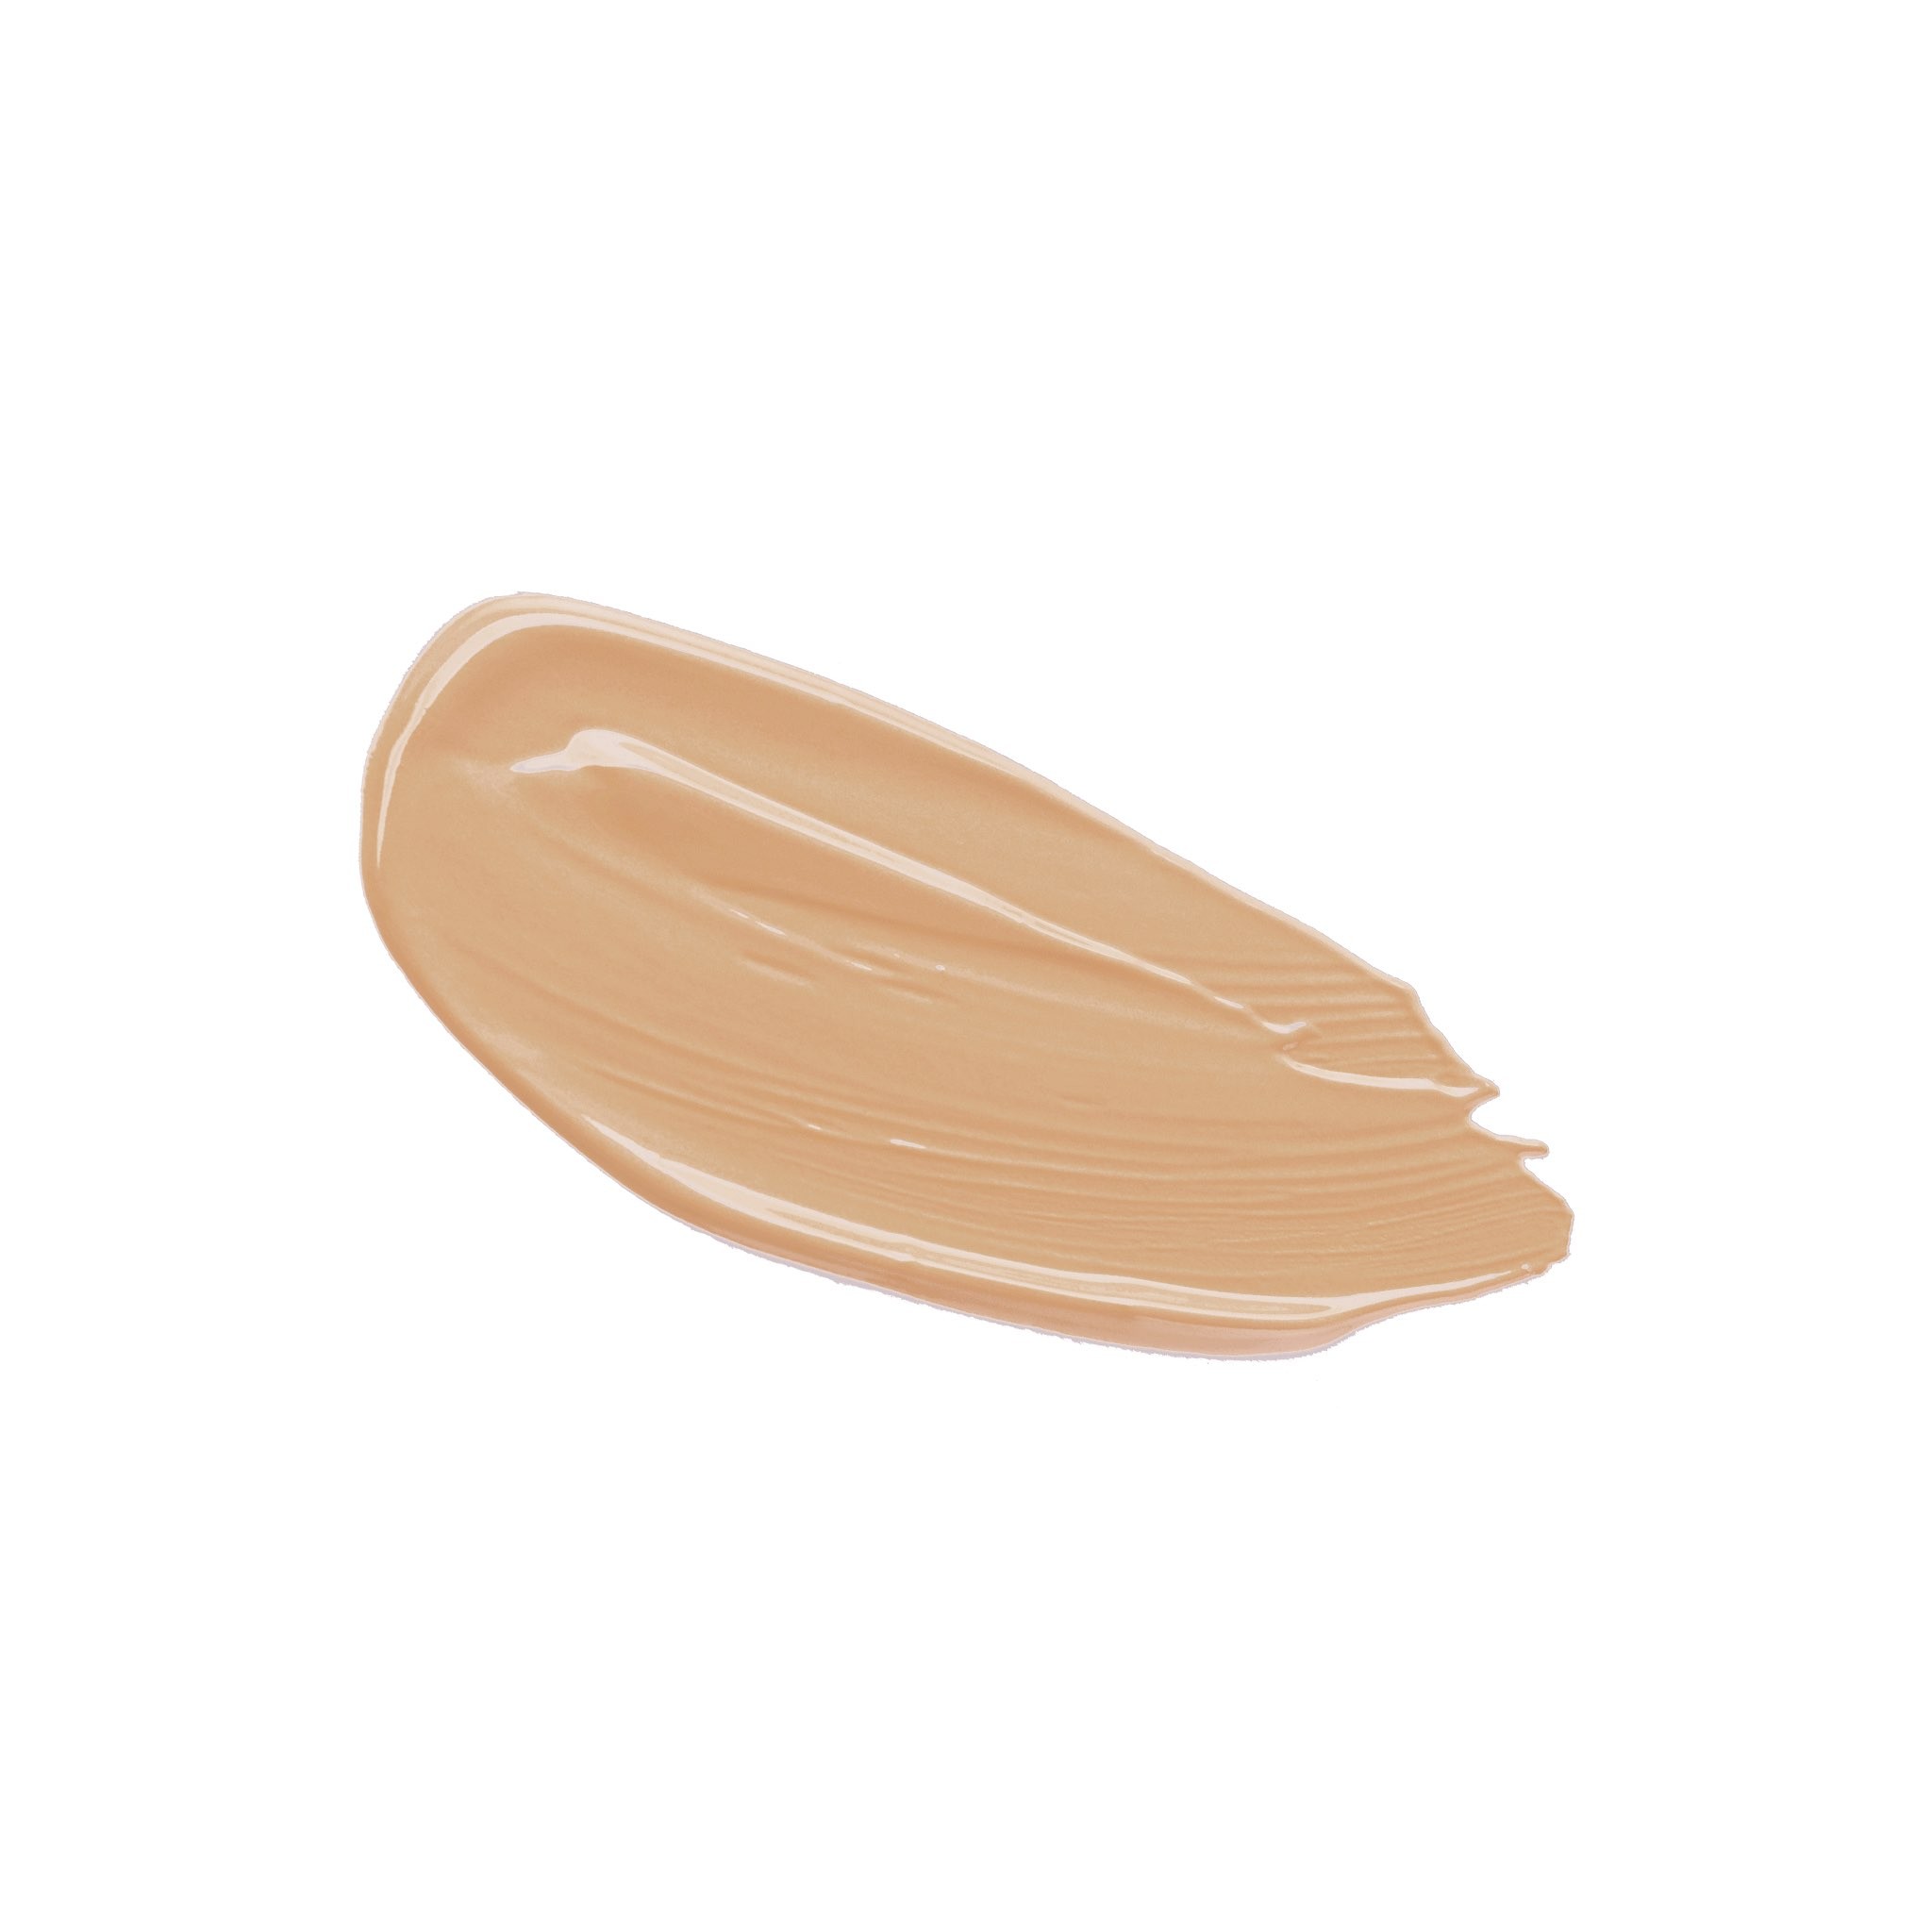 Screen Queen Natural Finish Foundation